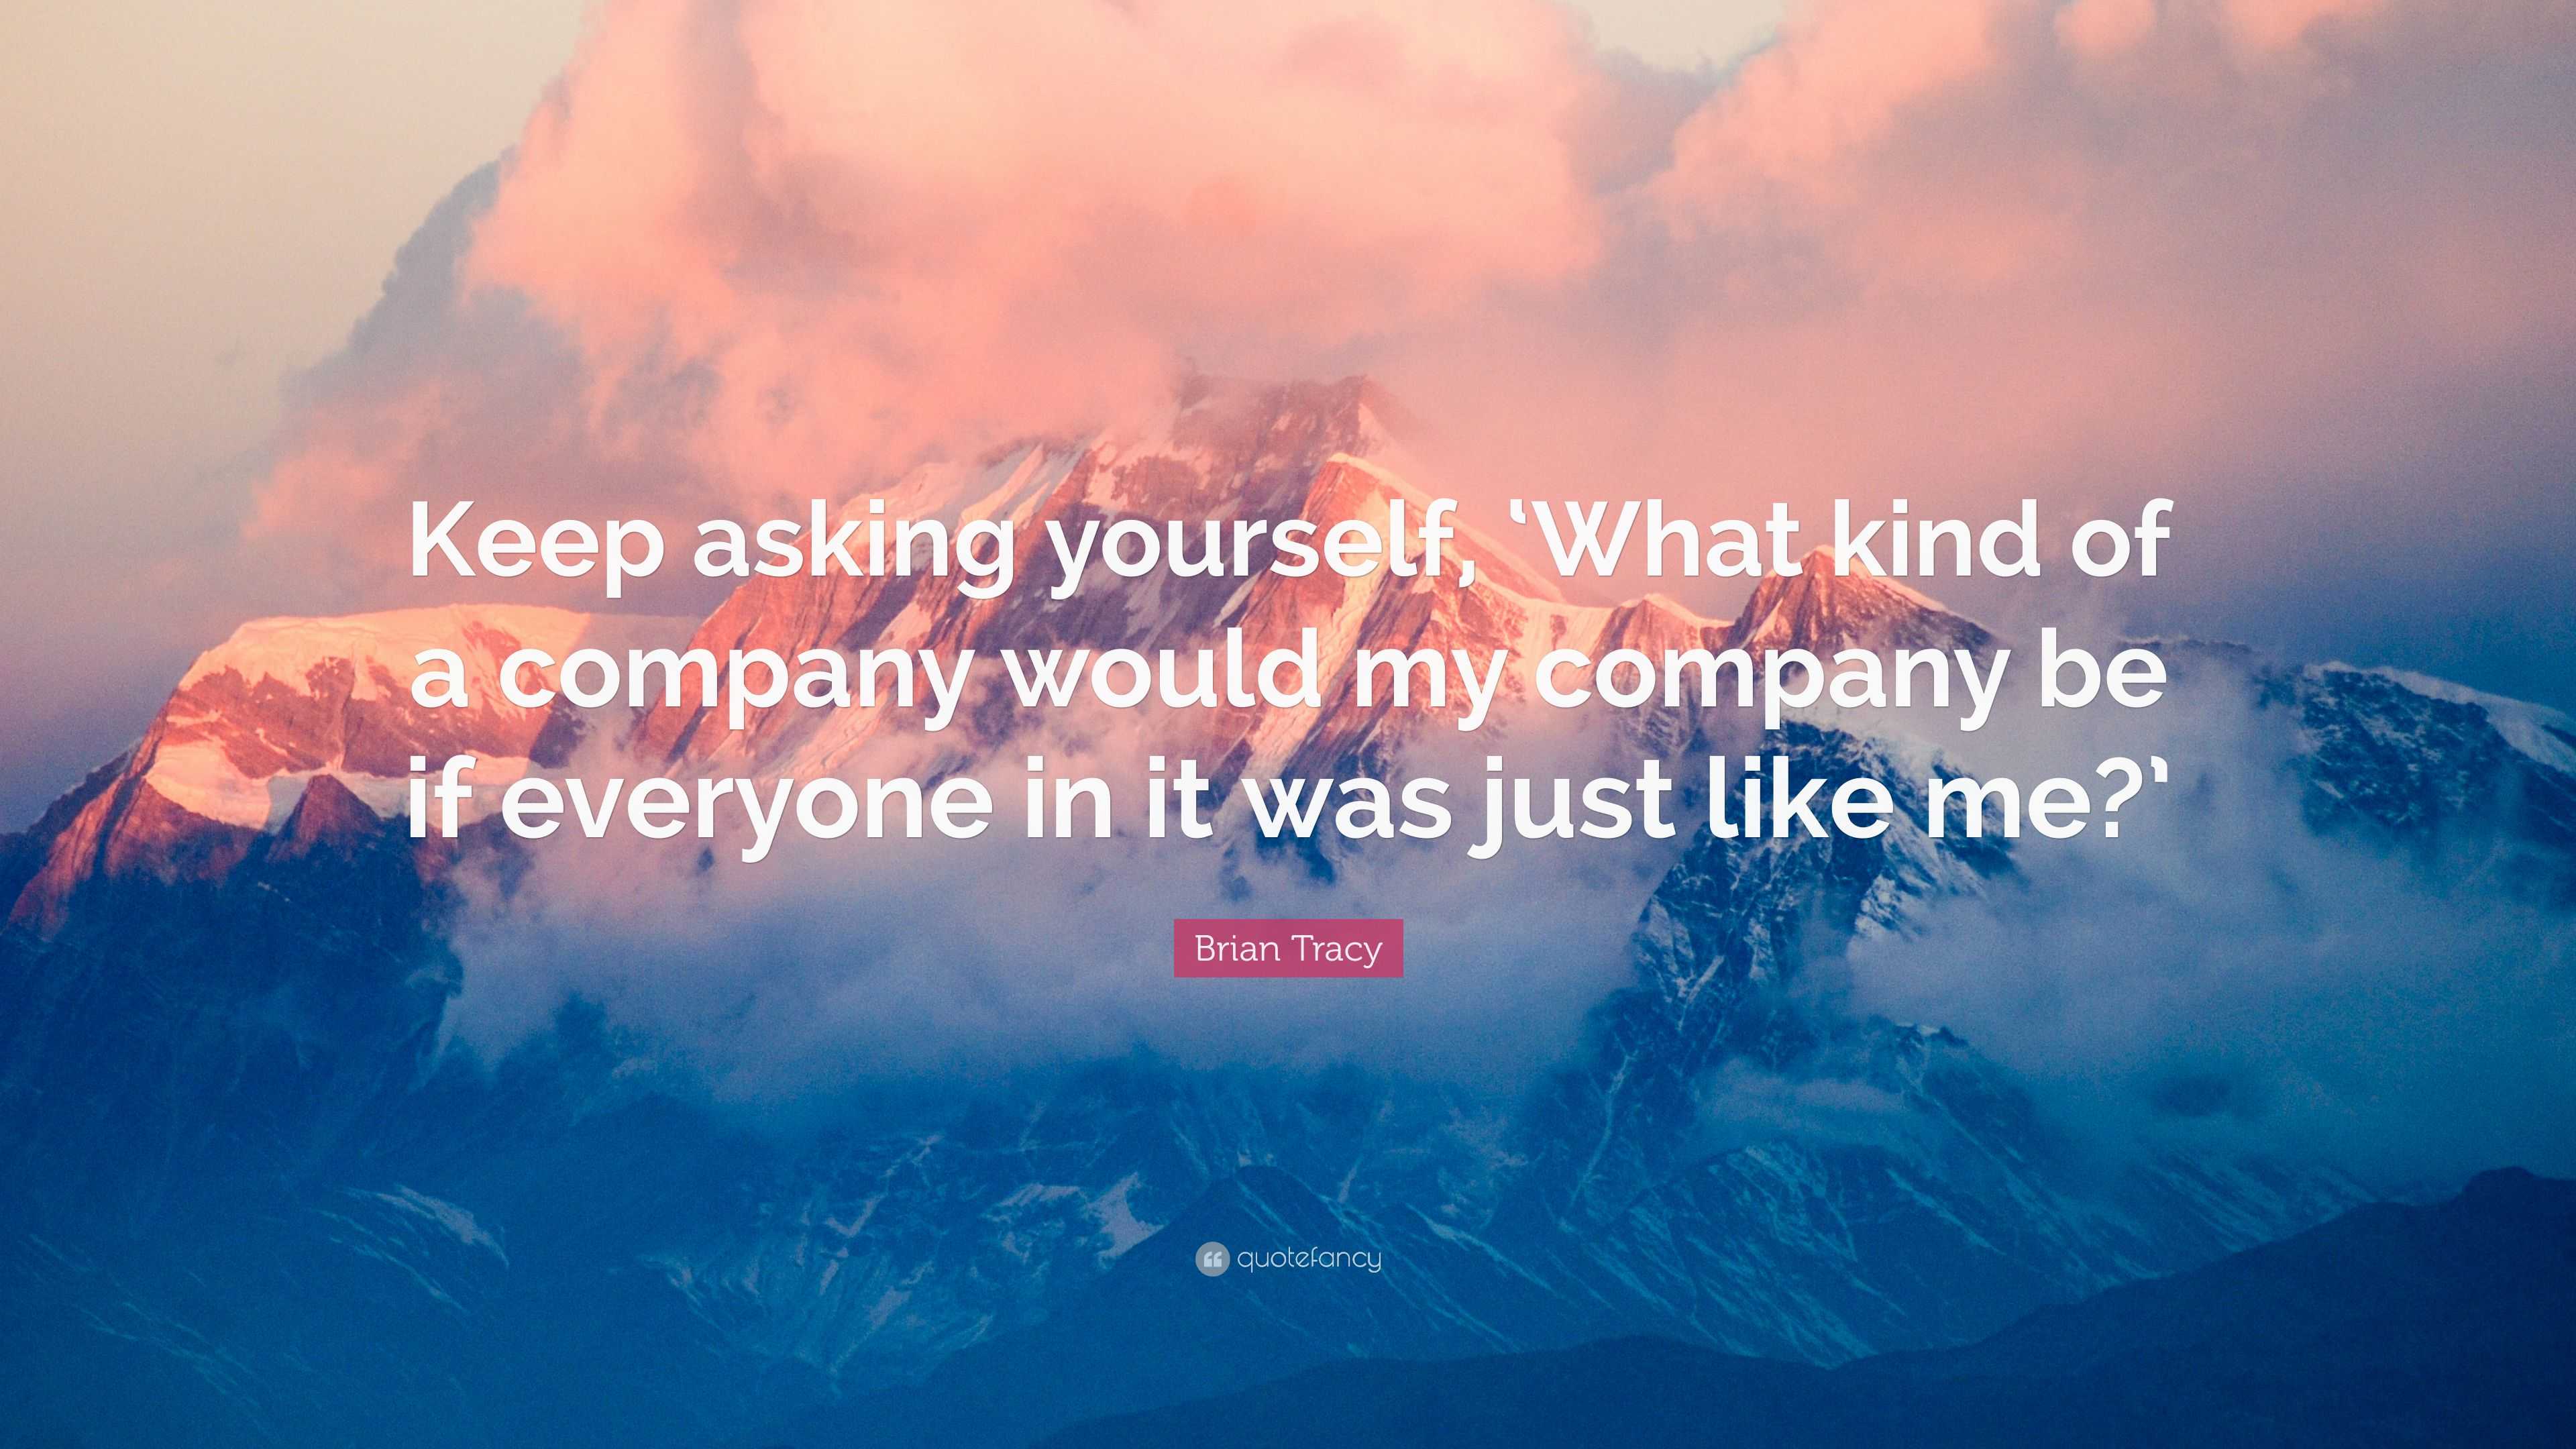 Brian Tracy Quote: “Keep asking yourself, ‘What kind of a company would ...